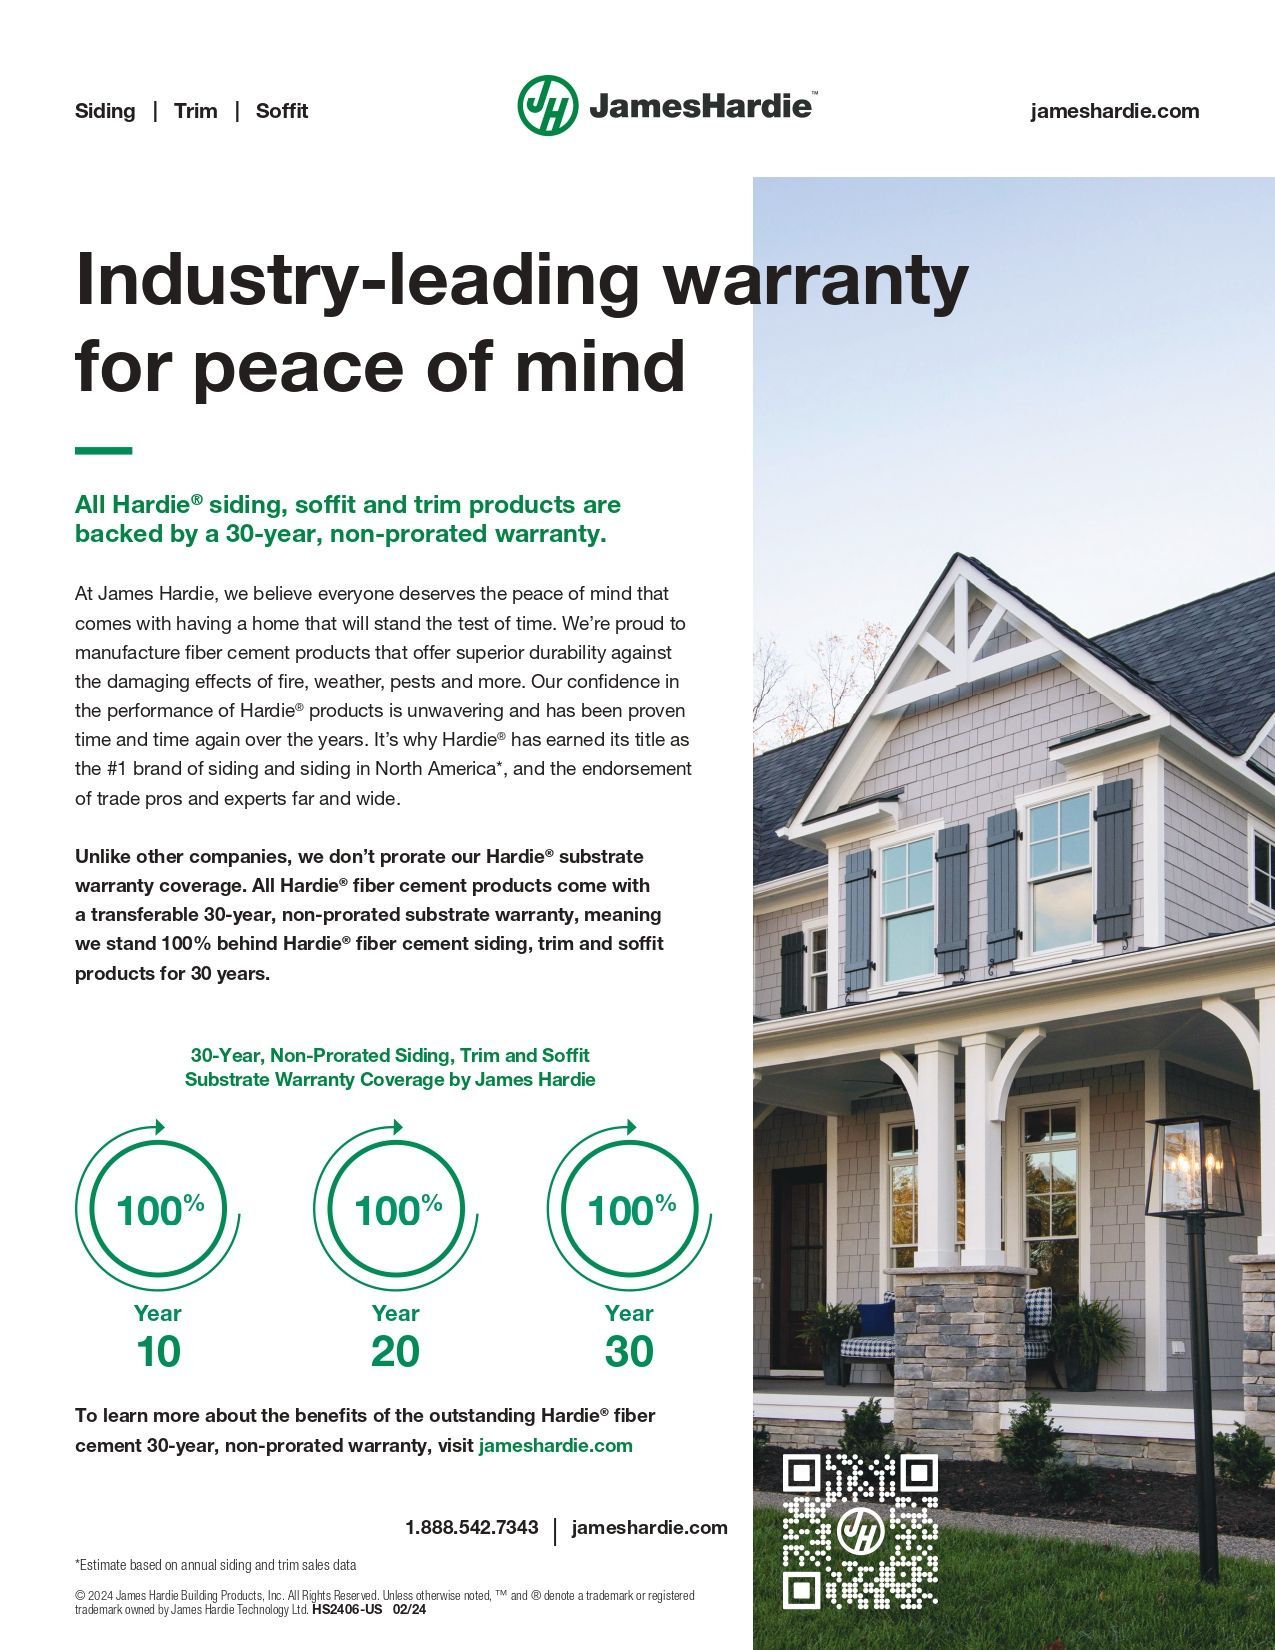 A flyer for industry-leading warranty for siding and trim